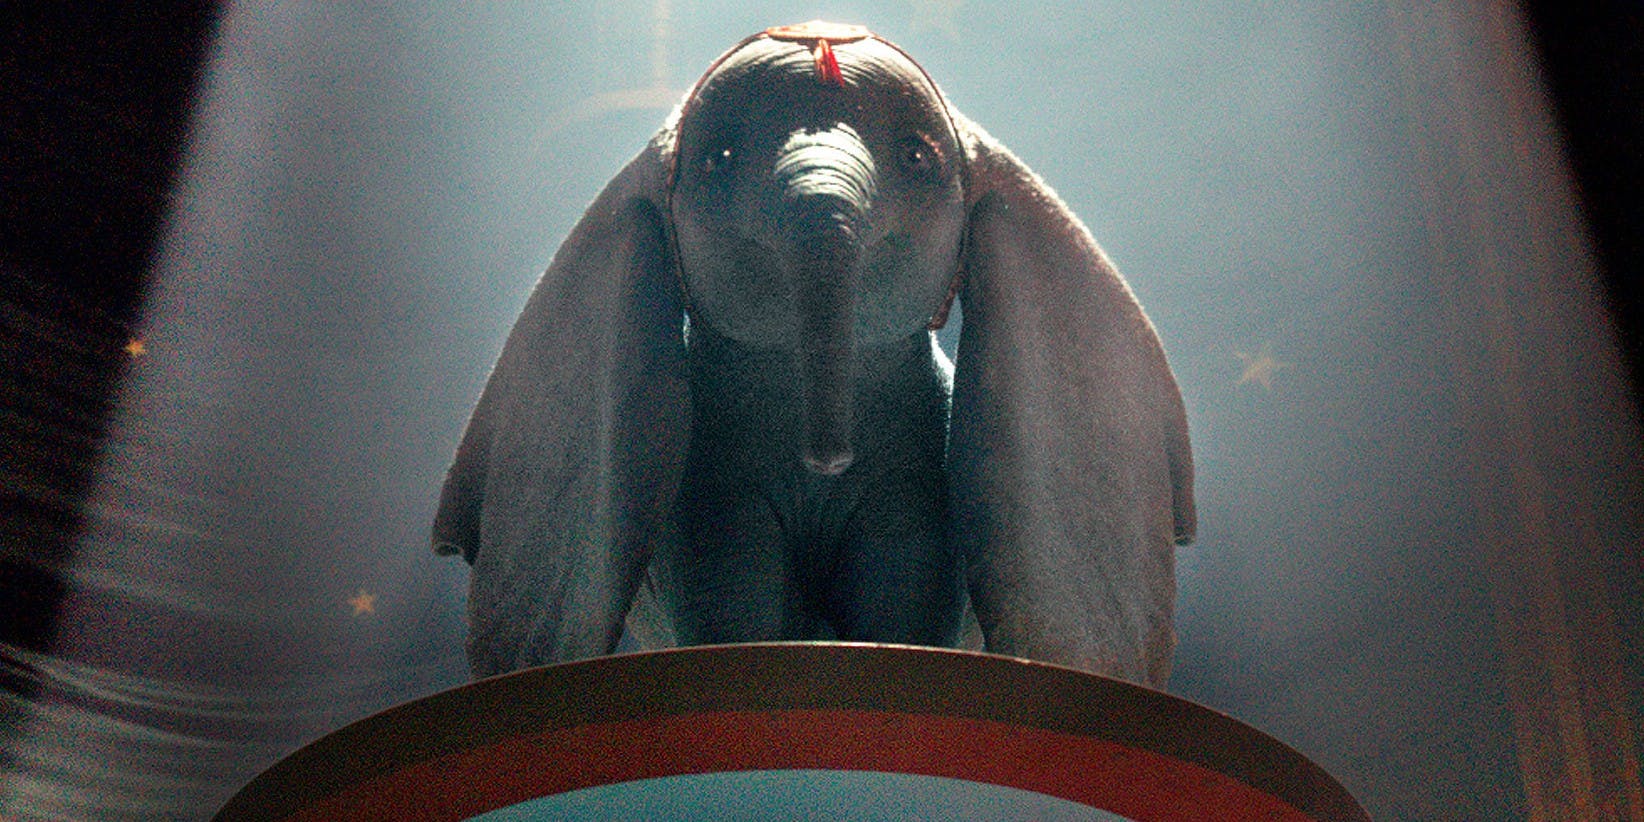 WIN: Cop An Eyeful Of Elephant Cuteness With Exclusive Tickets To ‘Dumbo’